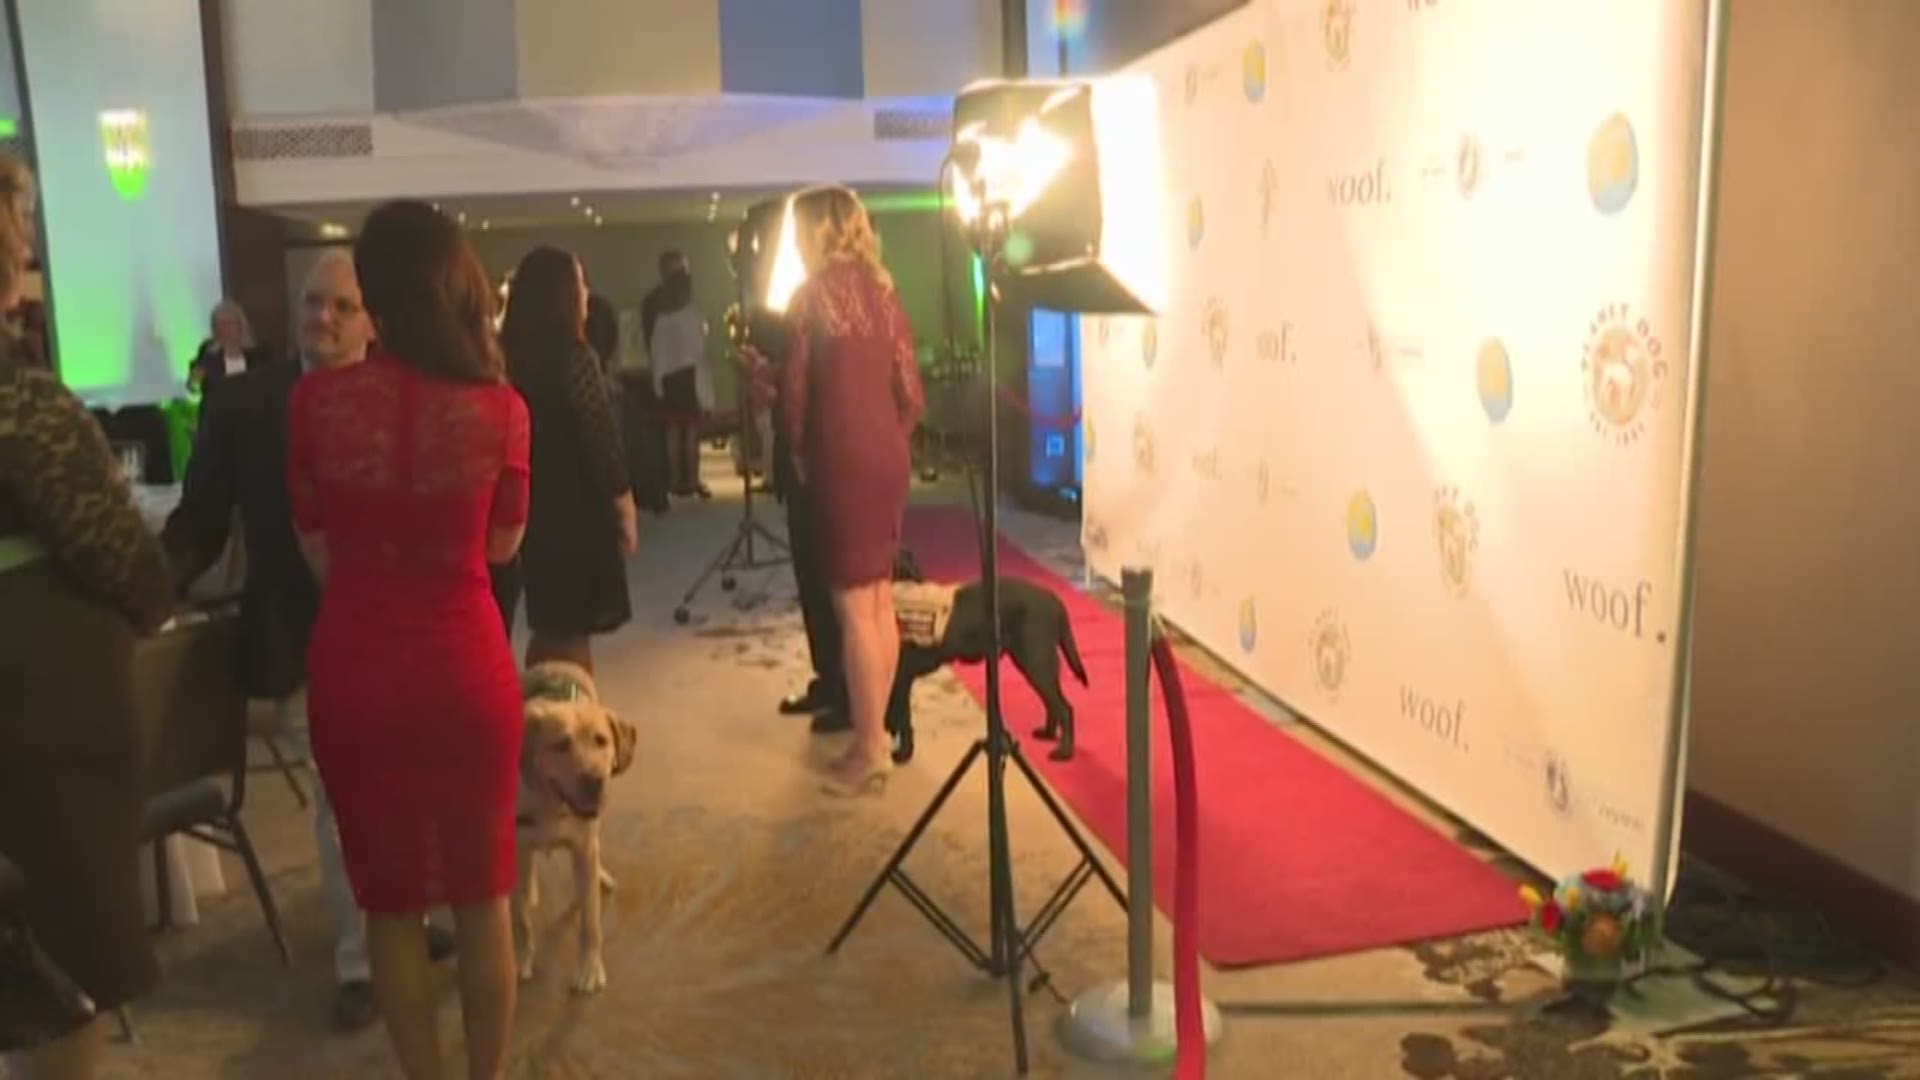 The Today show's Puppy With a Purpose, Charlie, attended the Planet Dog Ball in Portland to help raise money for programs that match service dogs with veterans